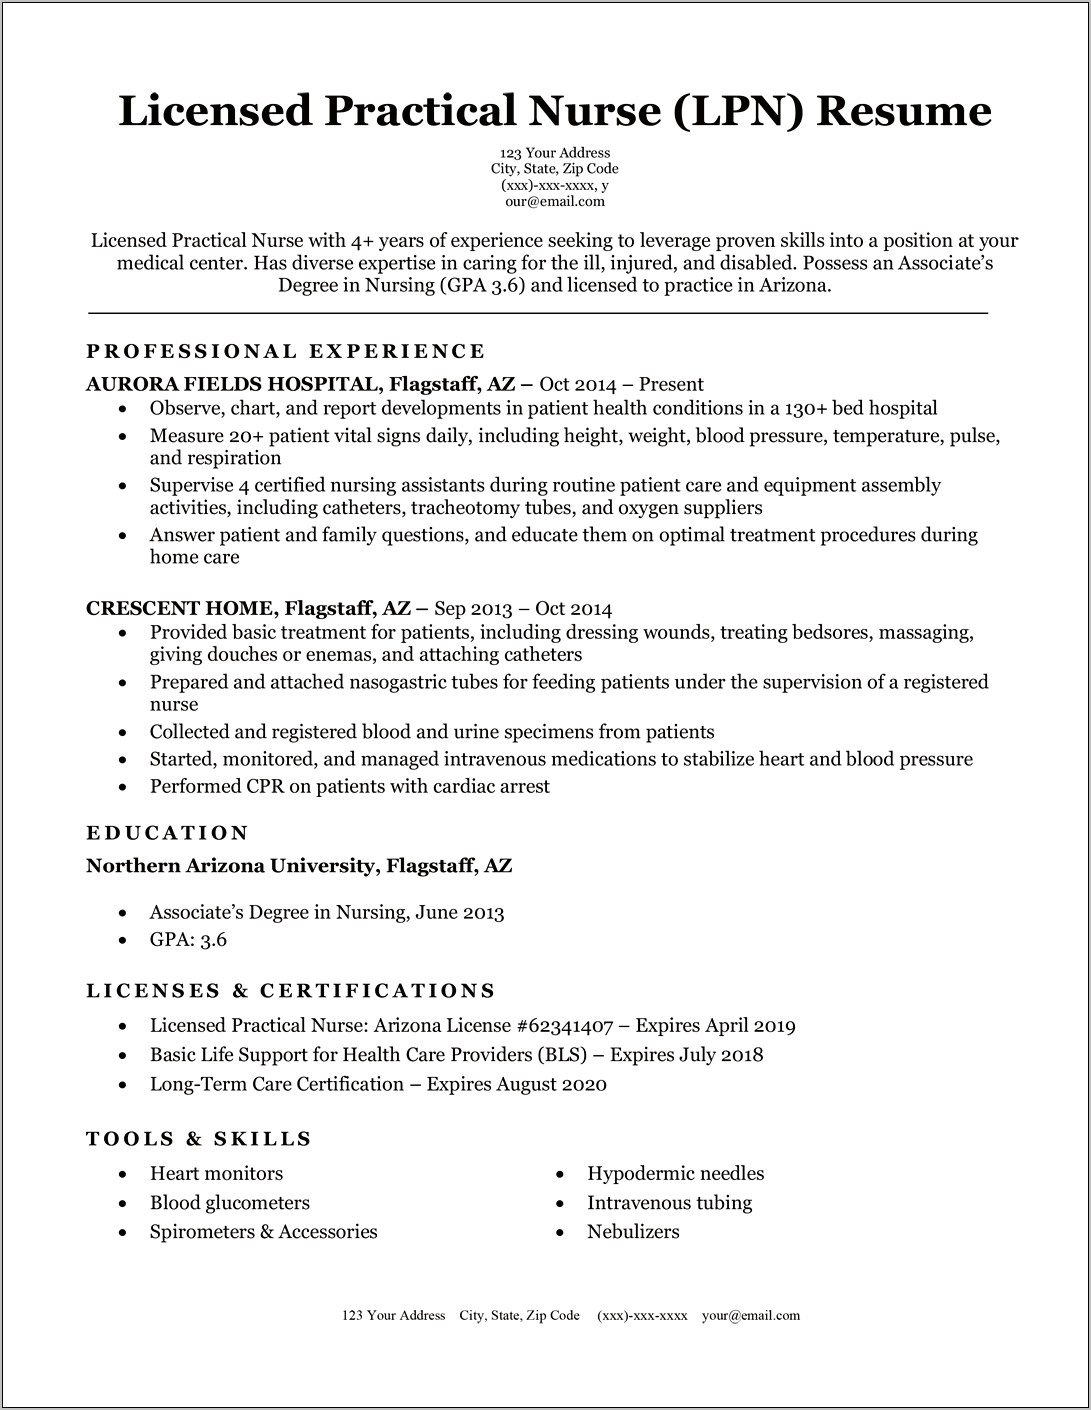 Nursing Resume With License Number Examples